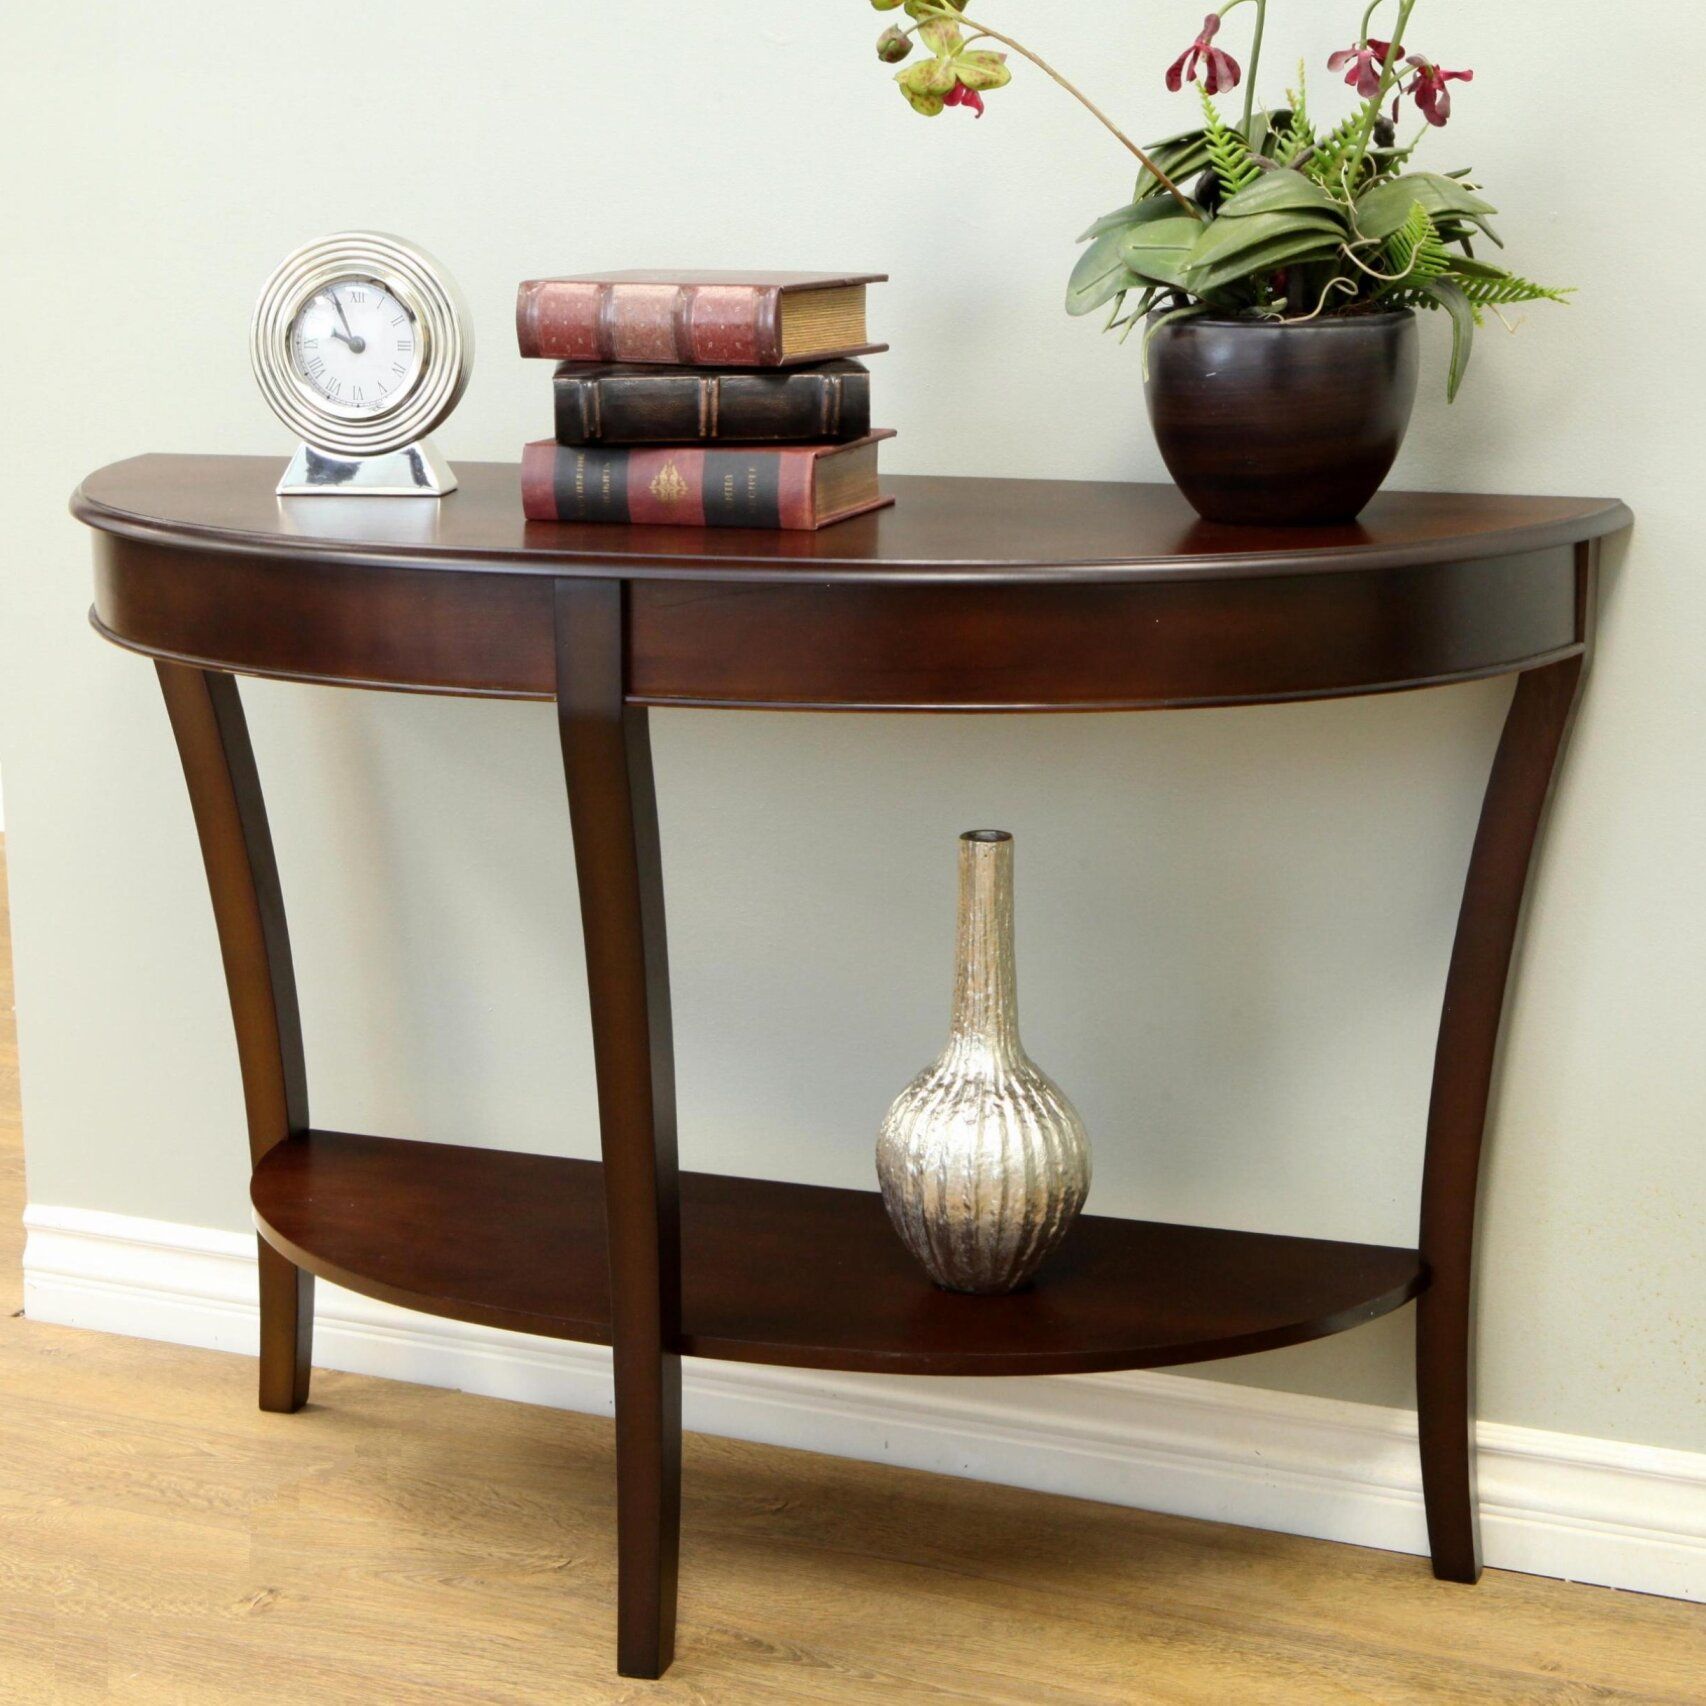 Three Posts Hickory Half – Round Console Table & Reviews | Wayfair For 2 Piece Round Console Tables Set (View 14 of 20)